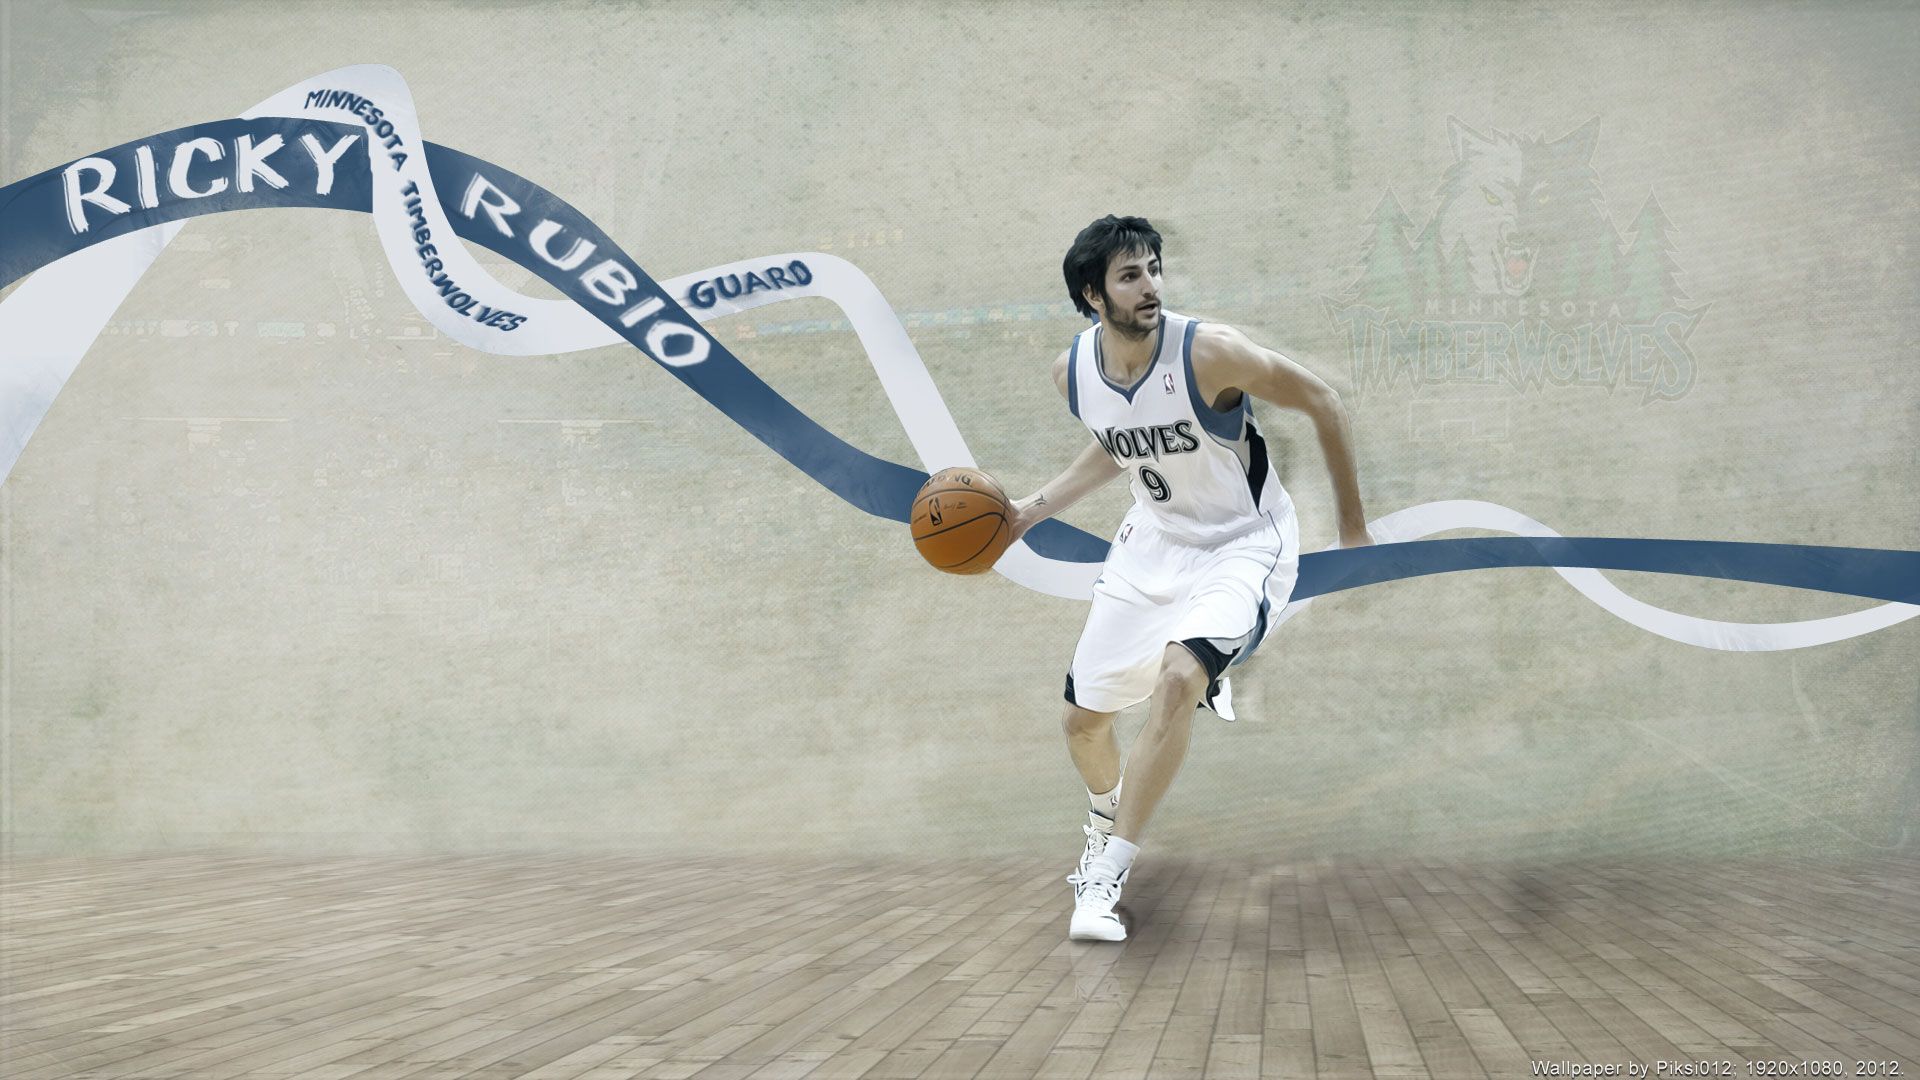 Ricky Rubio Wallpapers | Basketball Wallpapers at BasketWallpapers.com